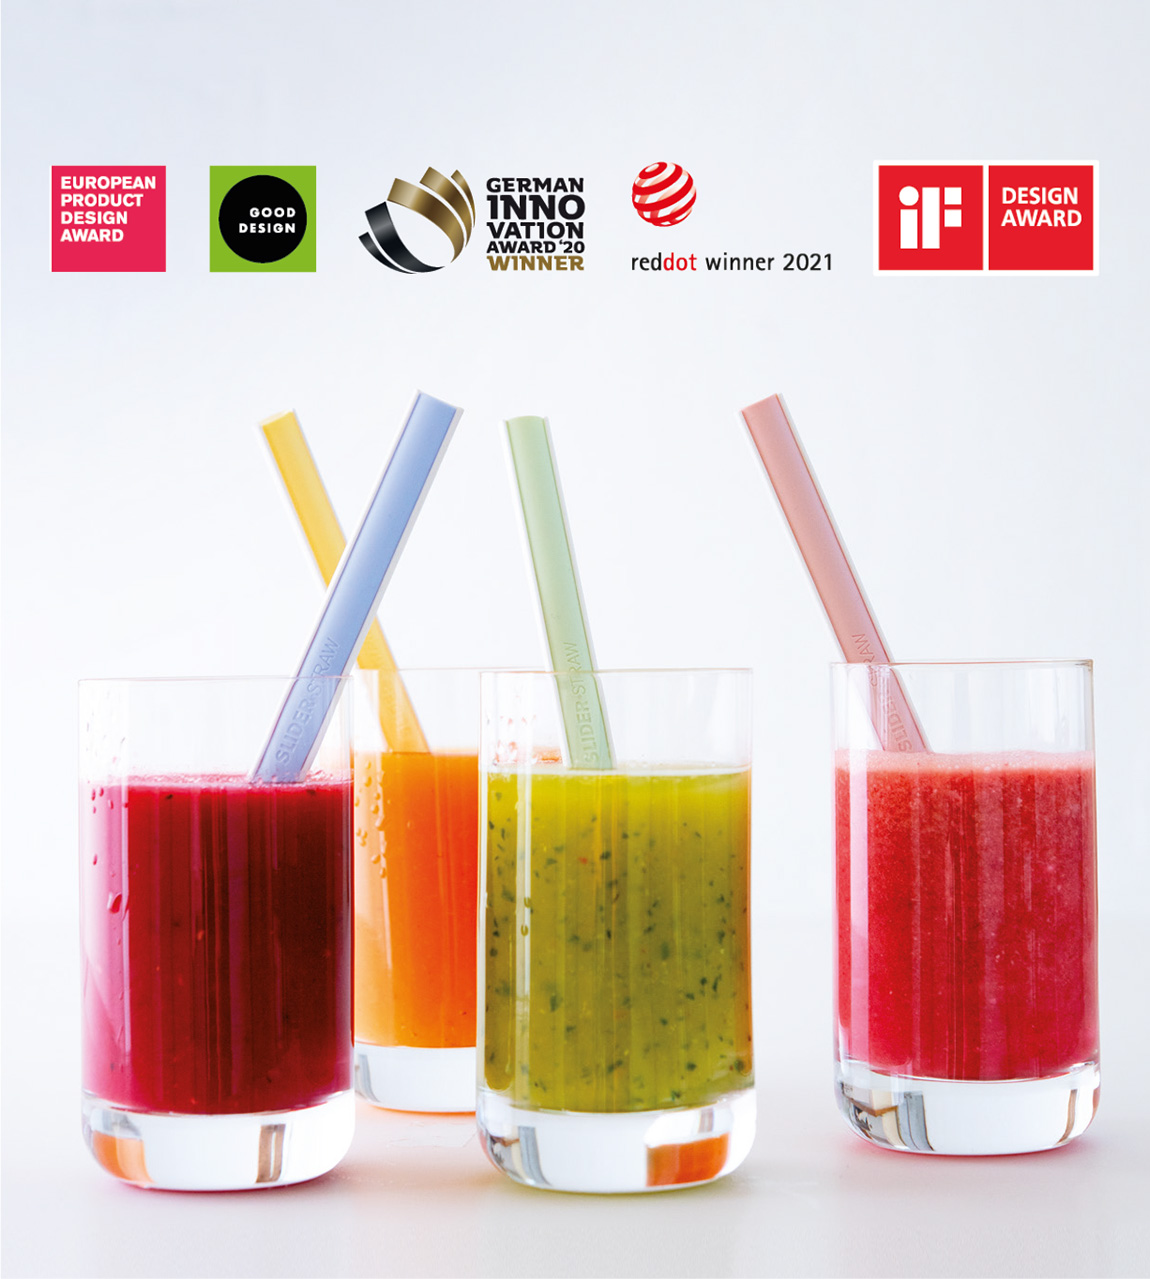 SLIDERSTRAW: AN INNOVATIVE CHRISTMAS PRESENT FOR A SUSTAINABLE FUTURE: AWARD-WINNING DRINKING STRAWS FEATURING A UNIQUE CLEANING TECHNIQUE